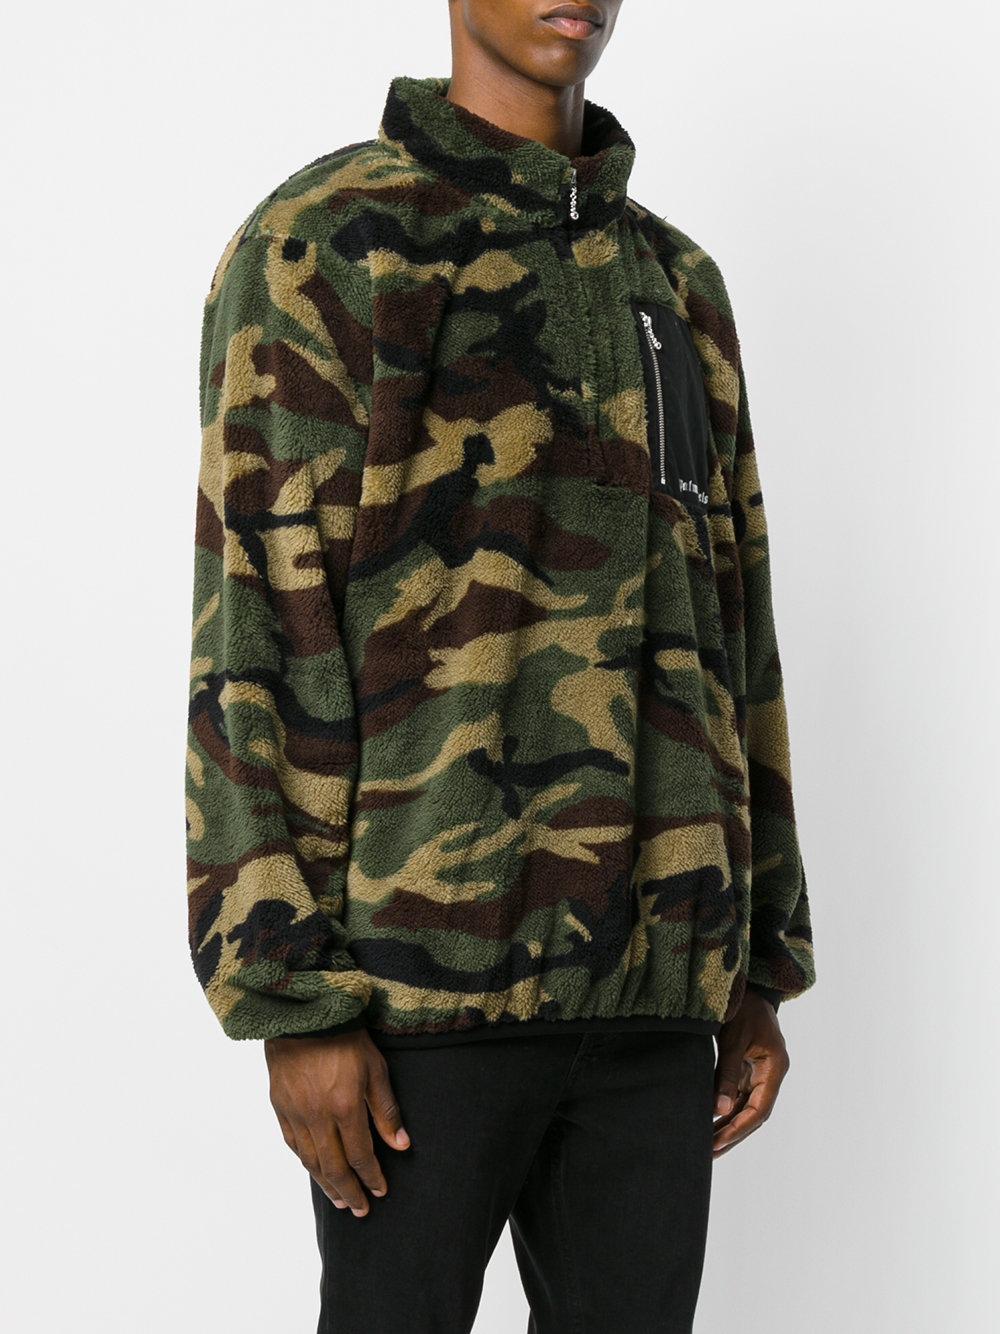 Palm Angels Wool Camouflage Zip Jumper in Green for Men - Lyst